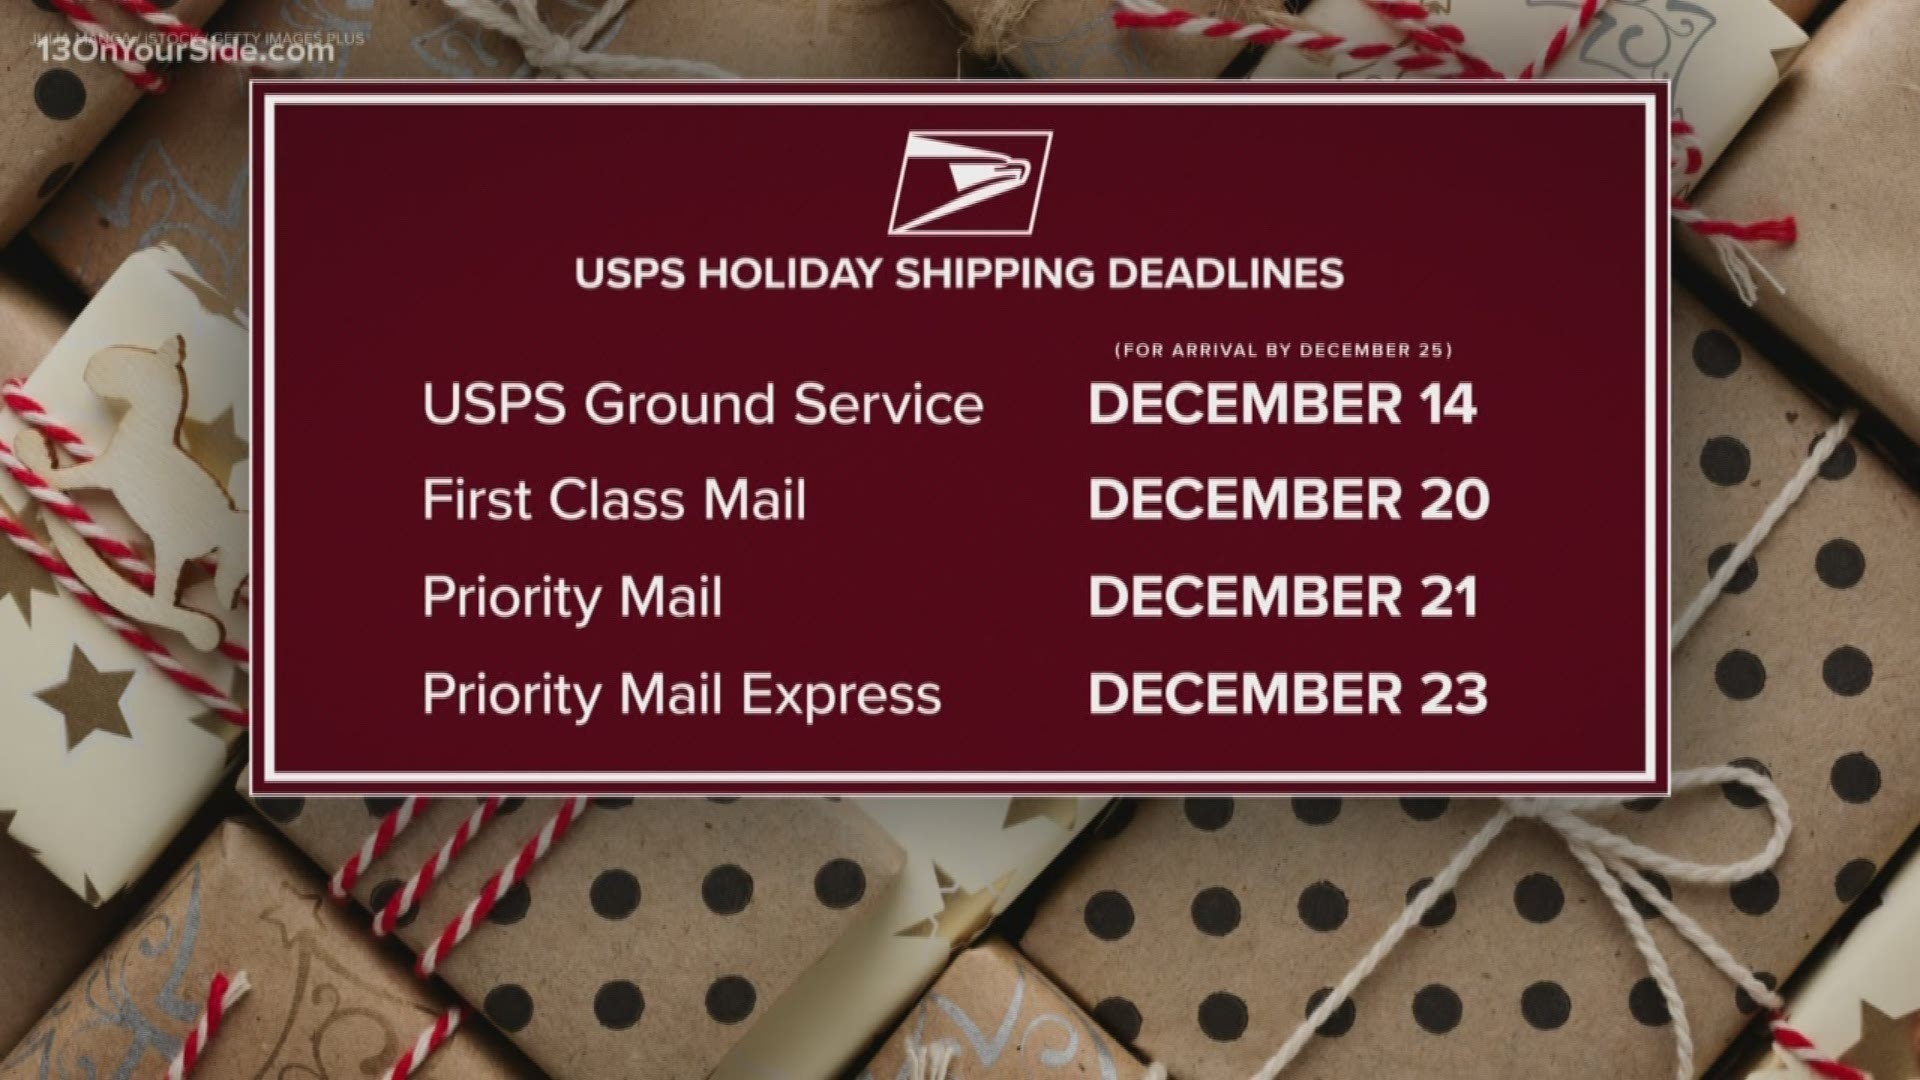 Only a few more days to get your holiday mail to the USPS!